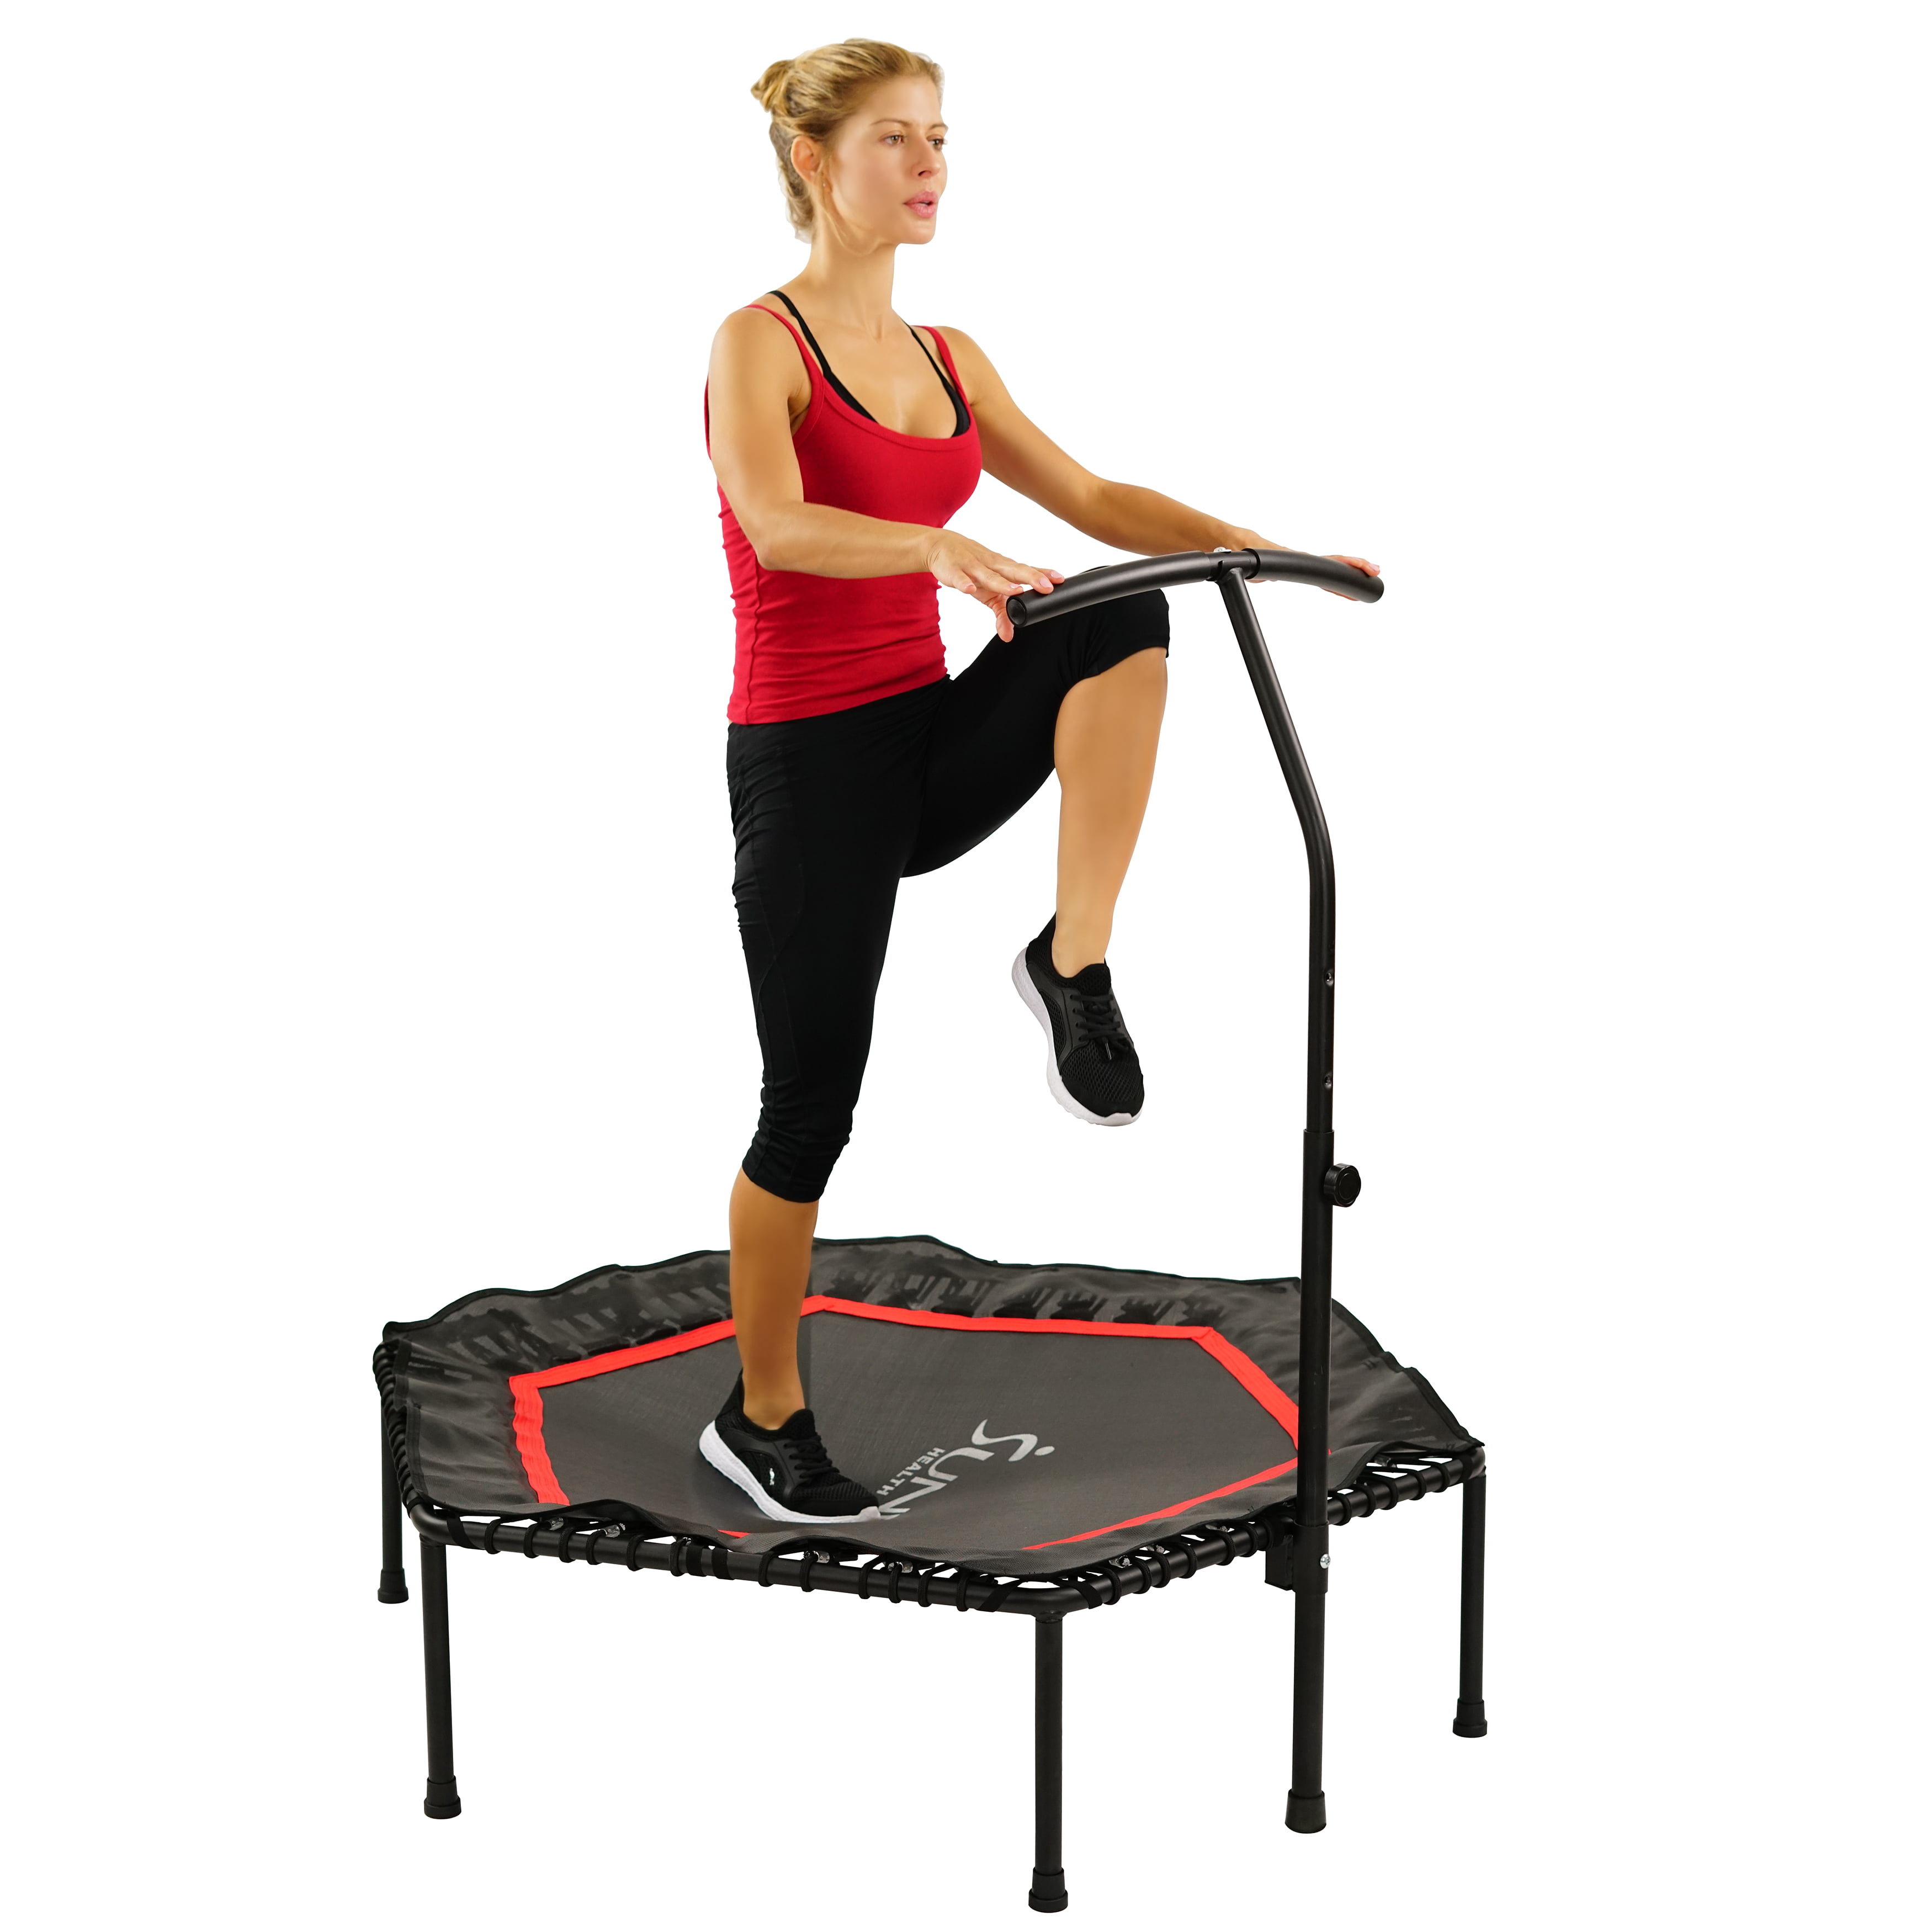 Sunny Health & Fitness Indoor Adjustable Trampoline Fitness with NO. Mini 079 Handlebar, Rebounder Exercise